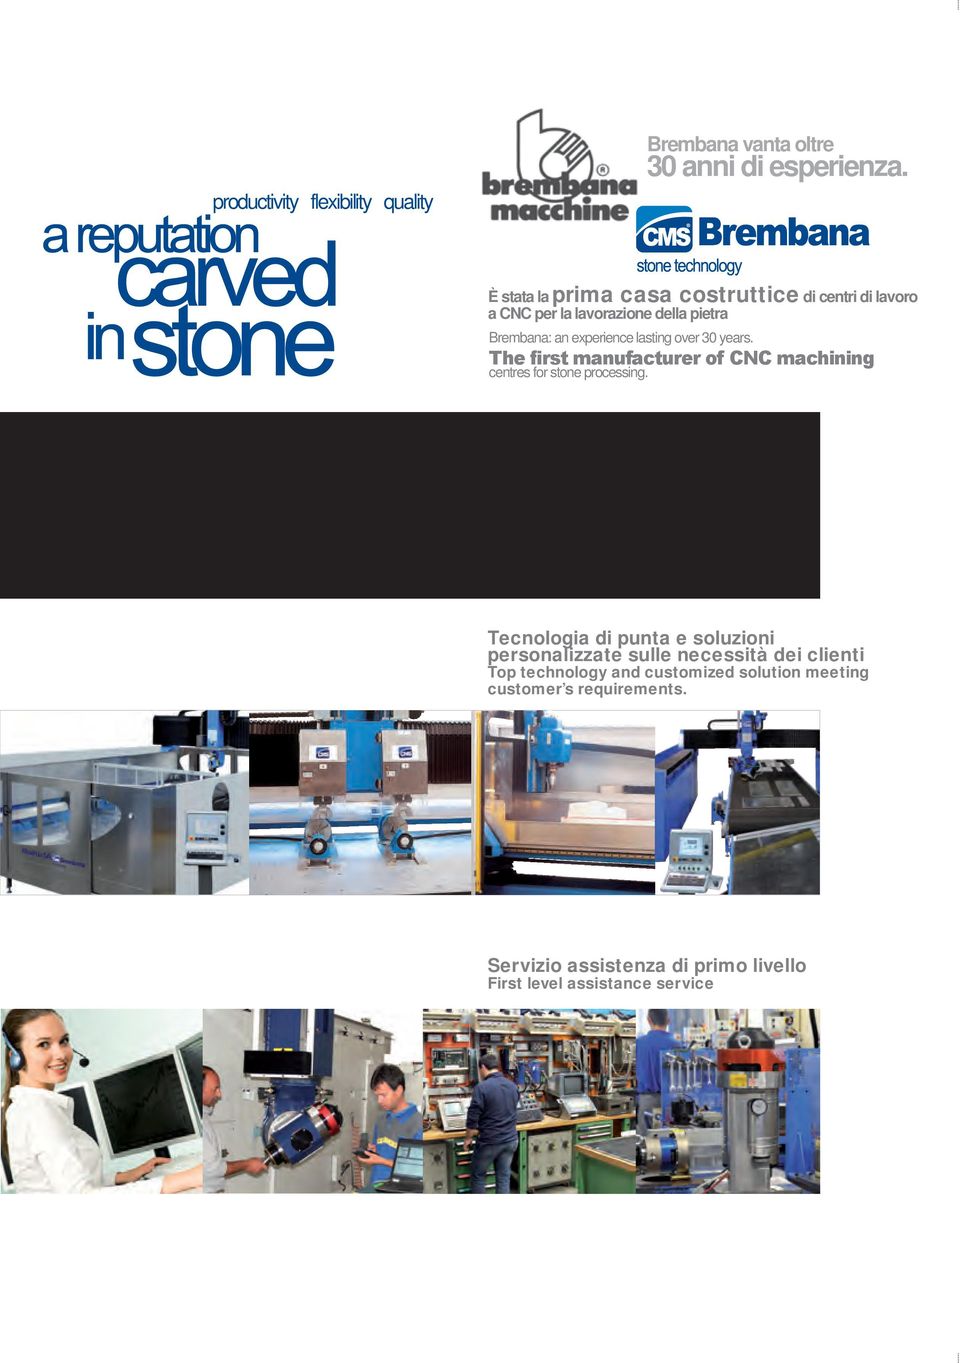 over 30 years. The first manufacturer of CNC machining centres for stone processing.